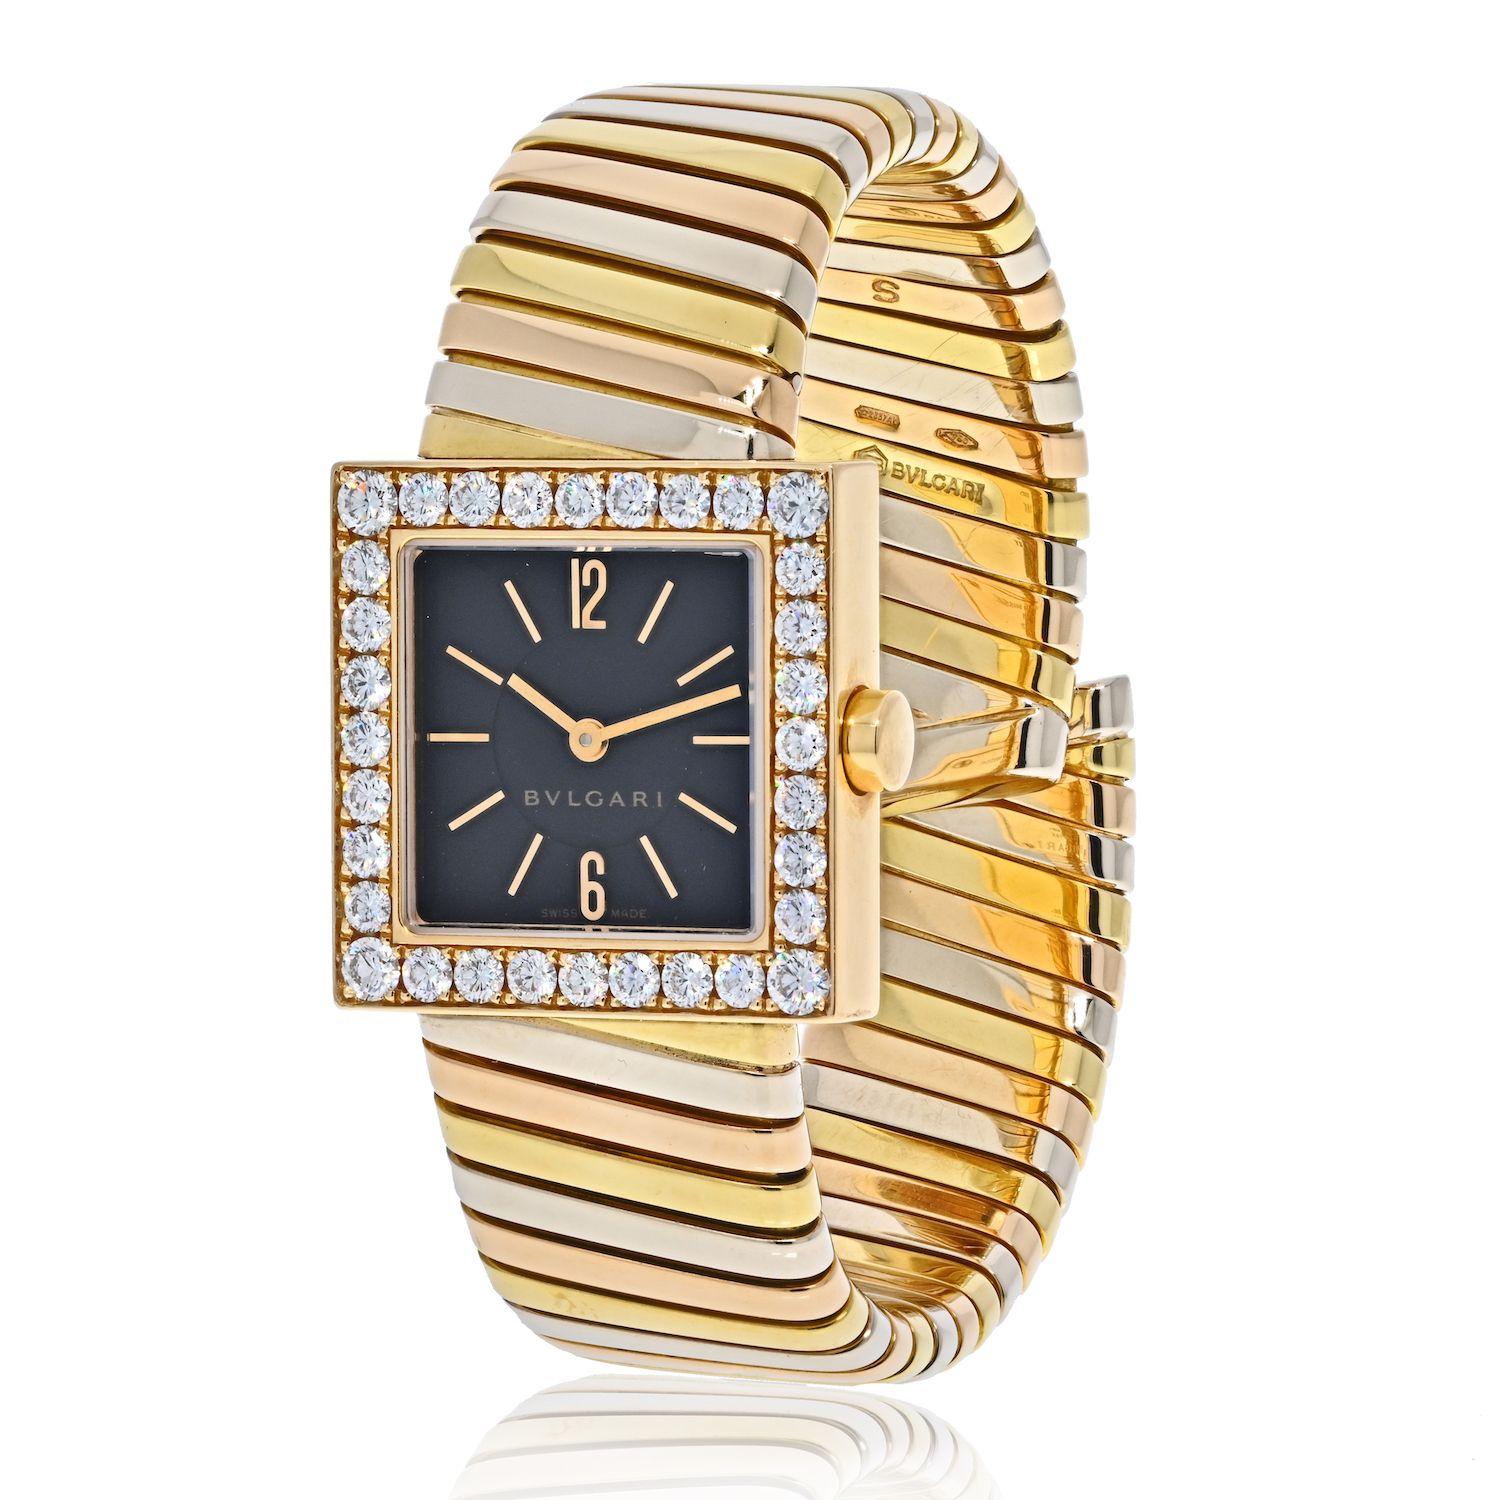 Ladies Bvlgari 18K Tri Color Square Diamond Bezel Tubogas SQ 222 T Watch. Excellent condition, this watch offers the look that became a classic and stayed classic since 1980's. Tubogas bracelet is in great shape and has little to no slack. Diamonds